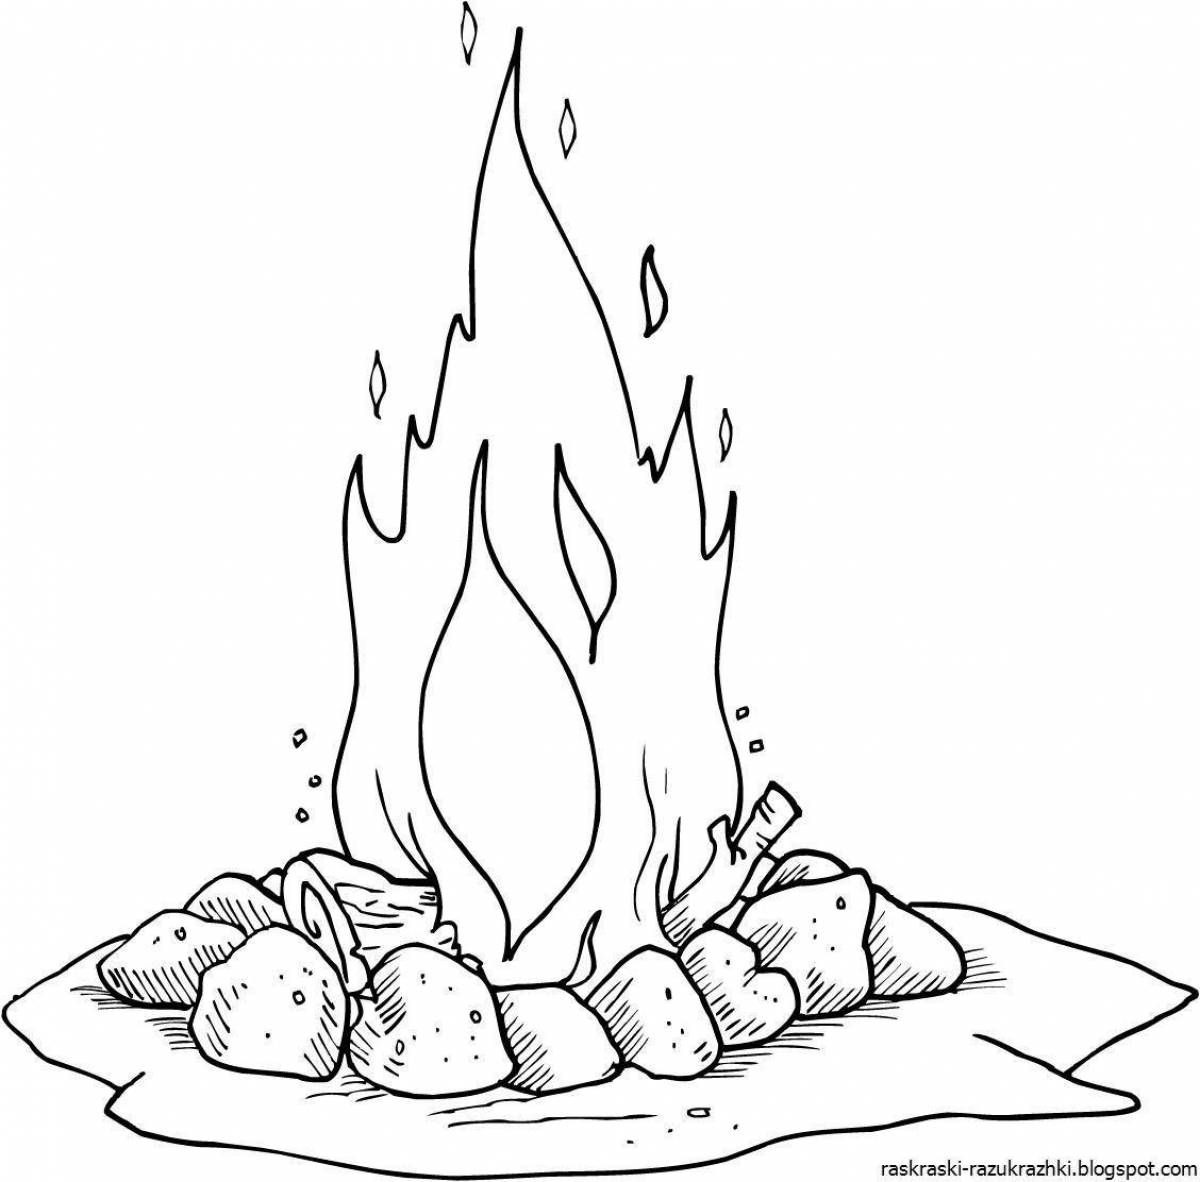 Colorful flame coloring page for kids